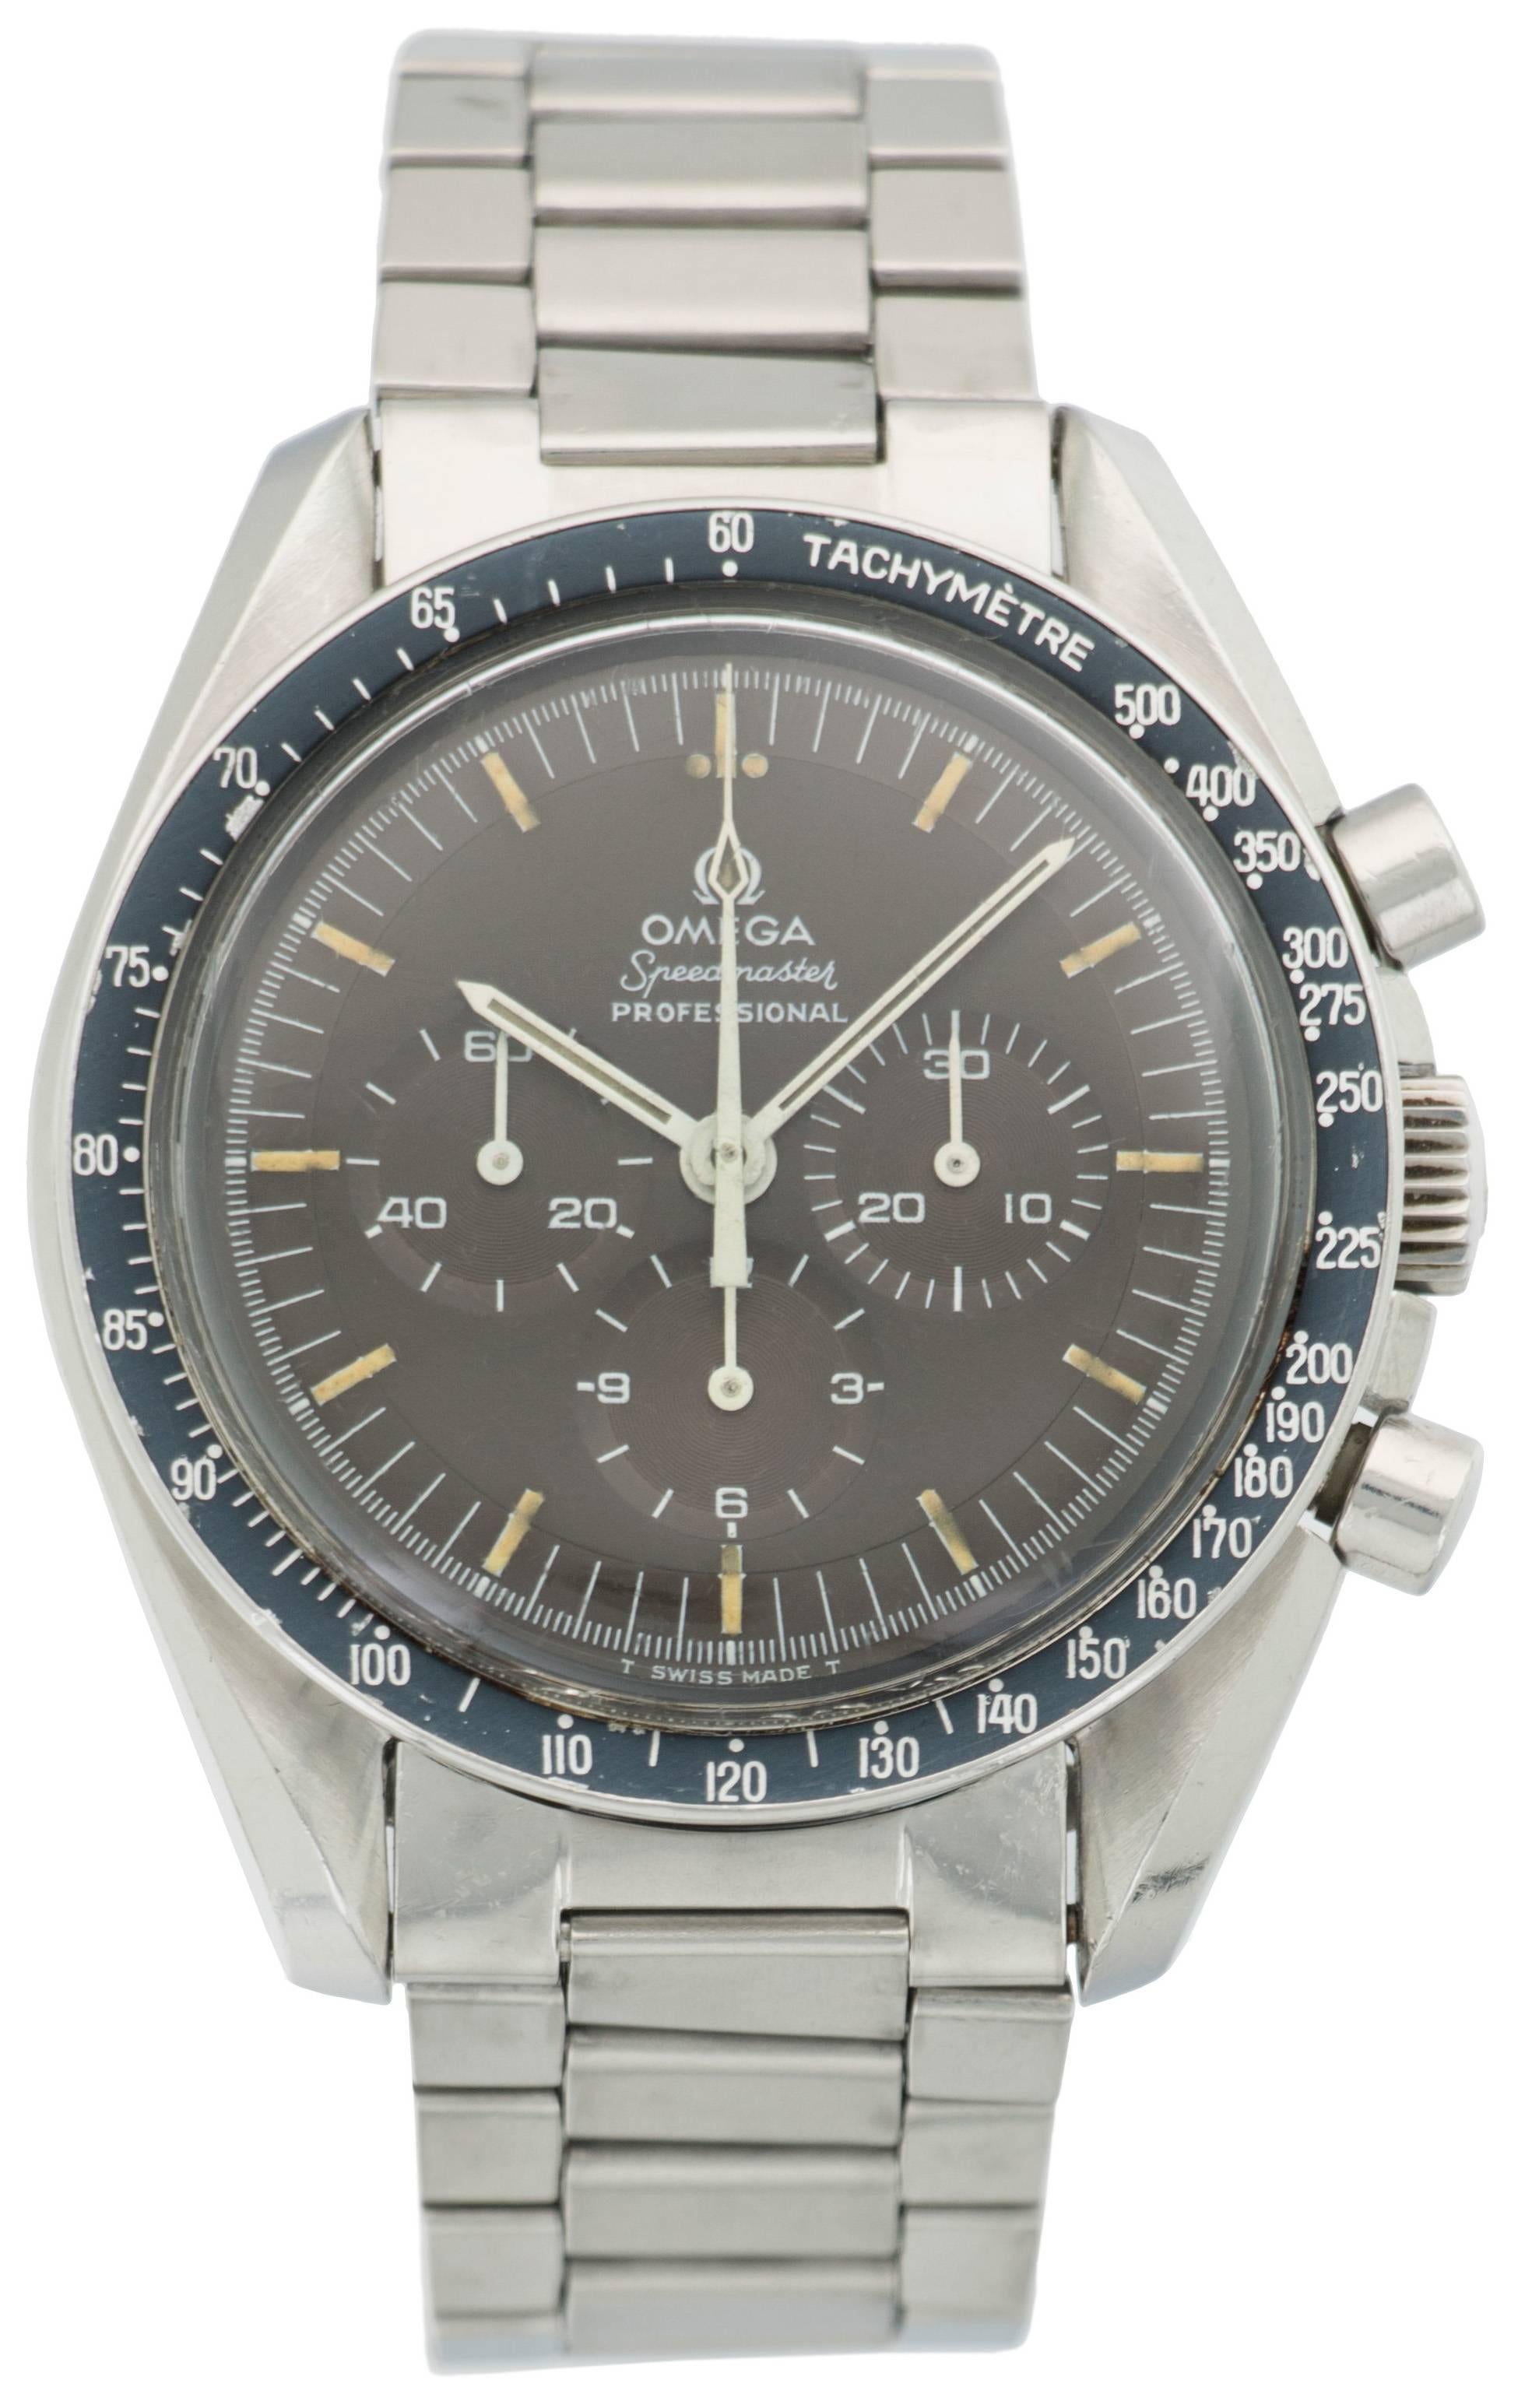 This fantastic Omega Speedmaster 145.022-69 ST features a gorgeous, even brown dial, slightly navy "DON" bezel and a case in excellent condition with typical, minor wear. These watches are becoming more highly sought after and rare,